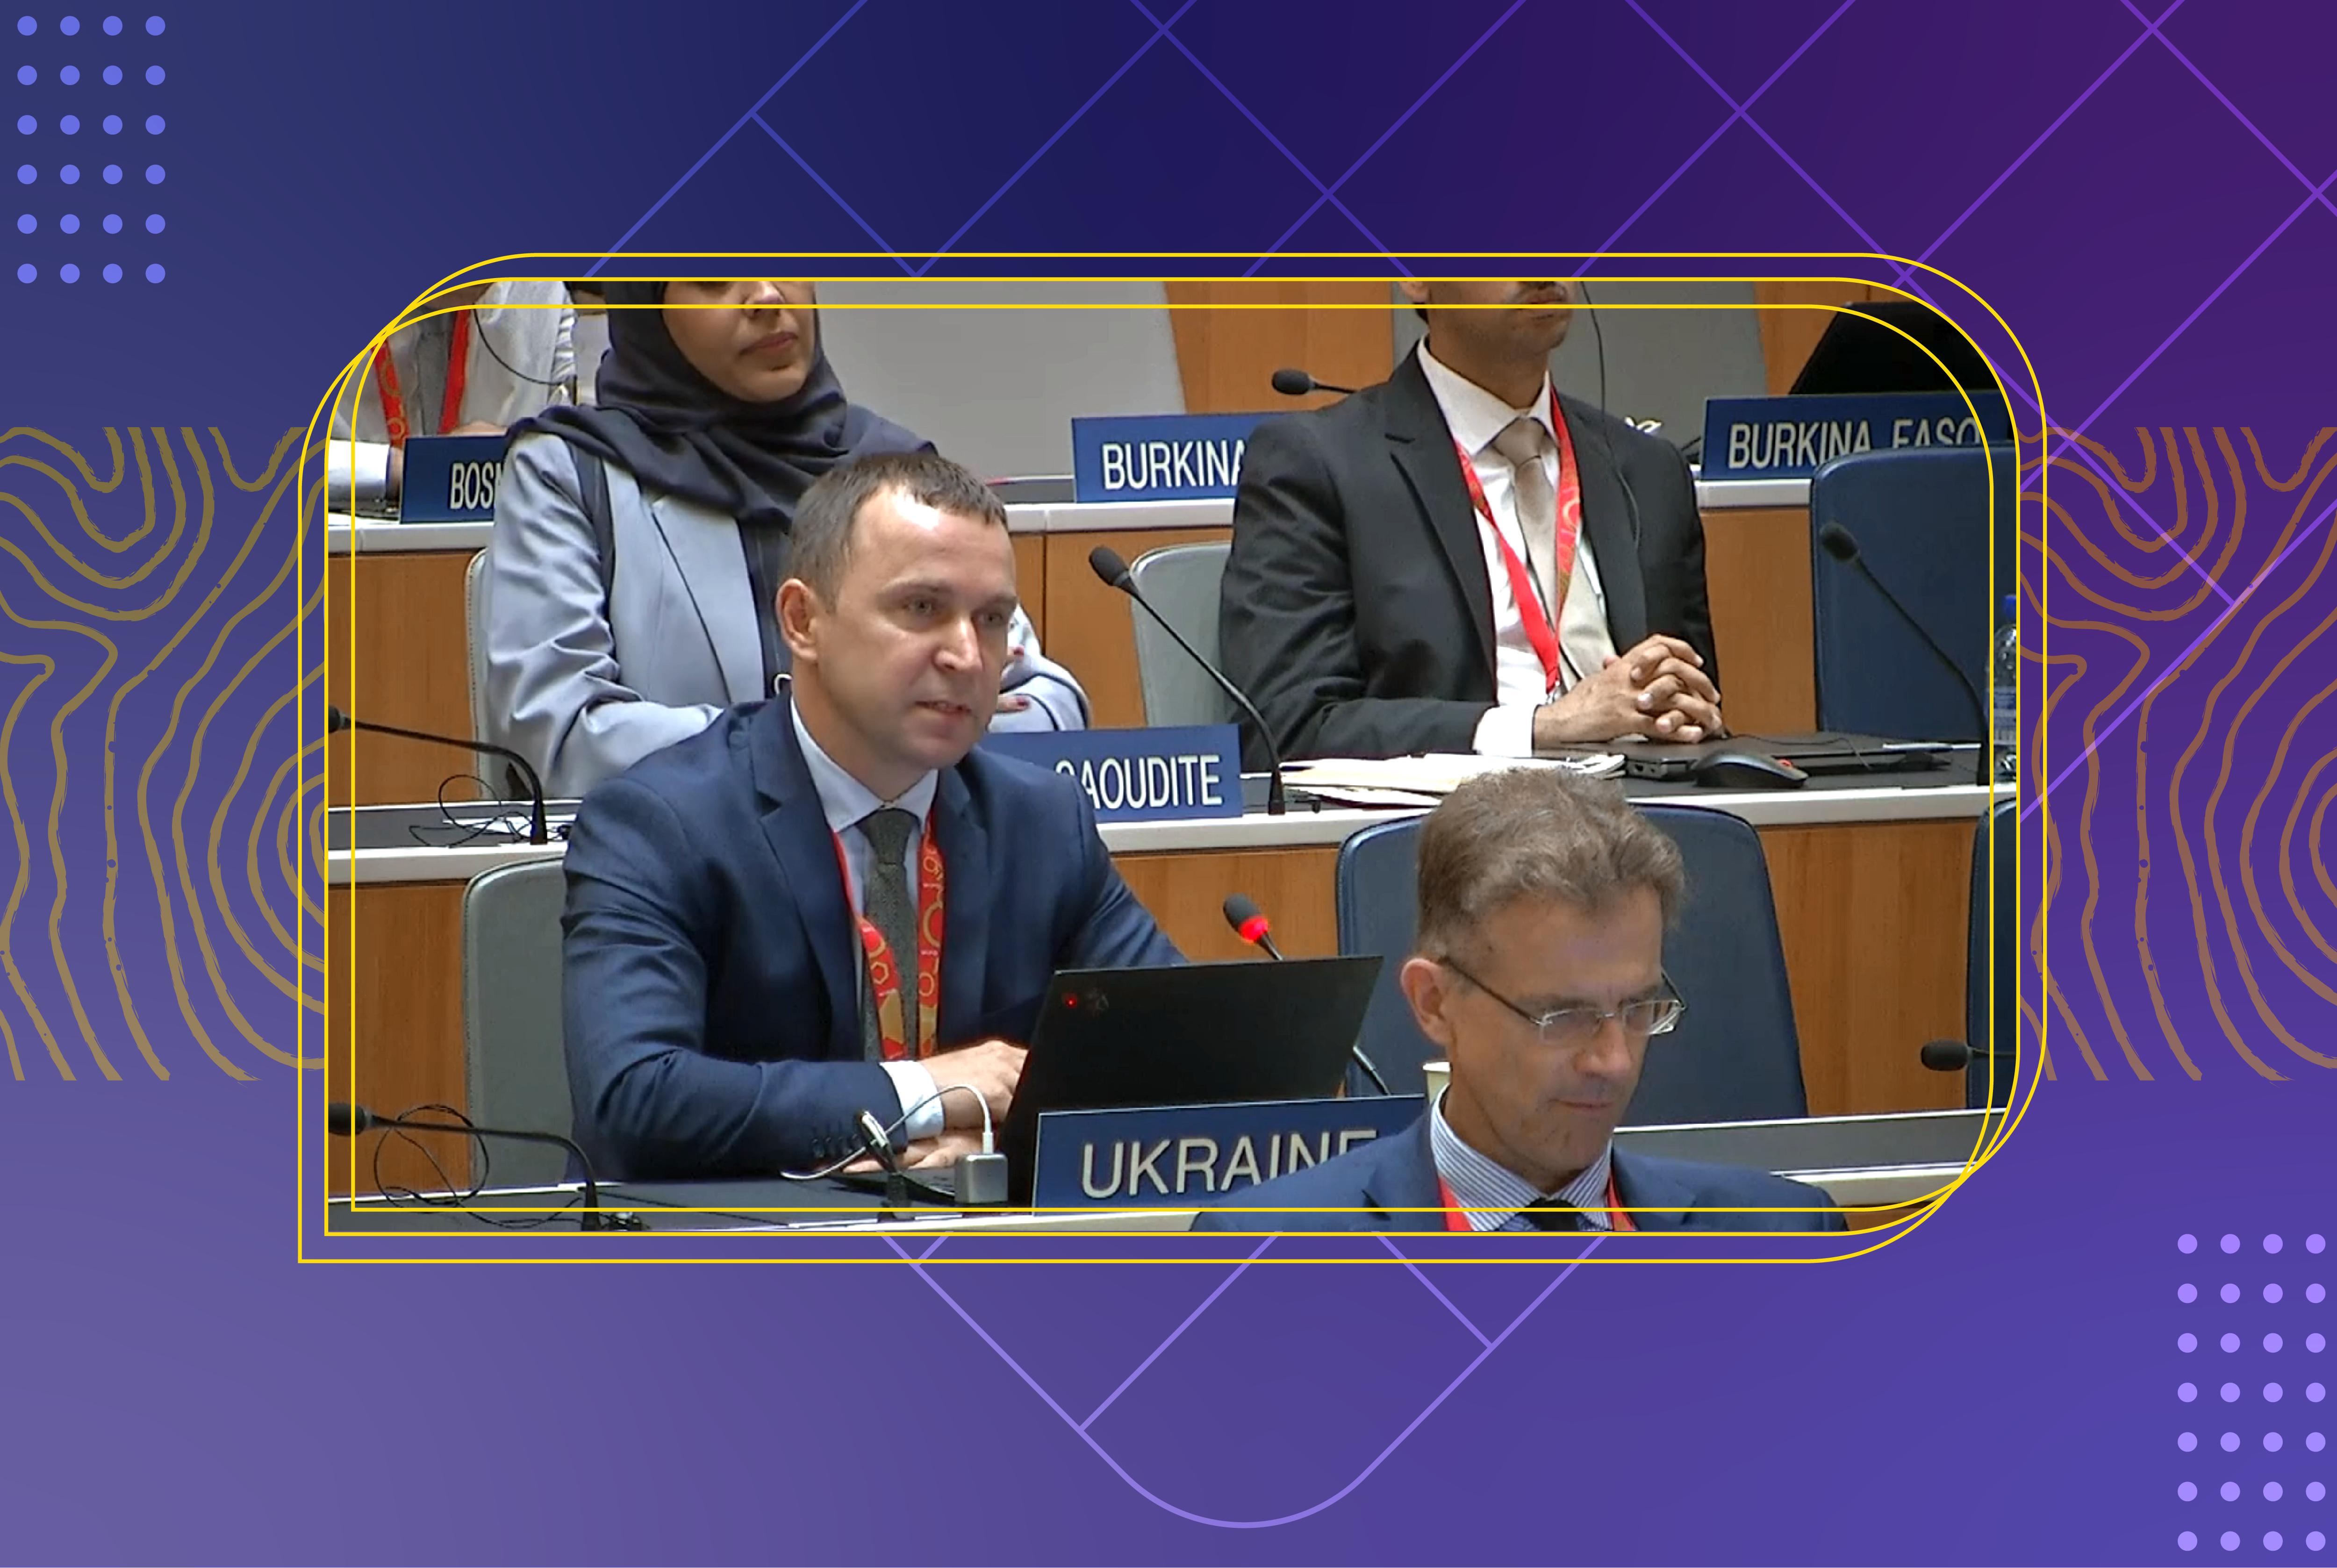 Ukraine is ready to join recently adopted WIPO projects aimed at global development of IP sphere and support of IP offices in times of crisis, – Bogdan Paduchak at the WIPO General Assembly